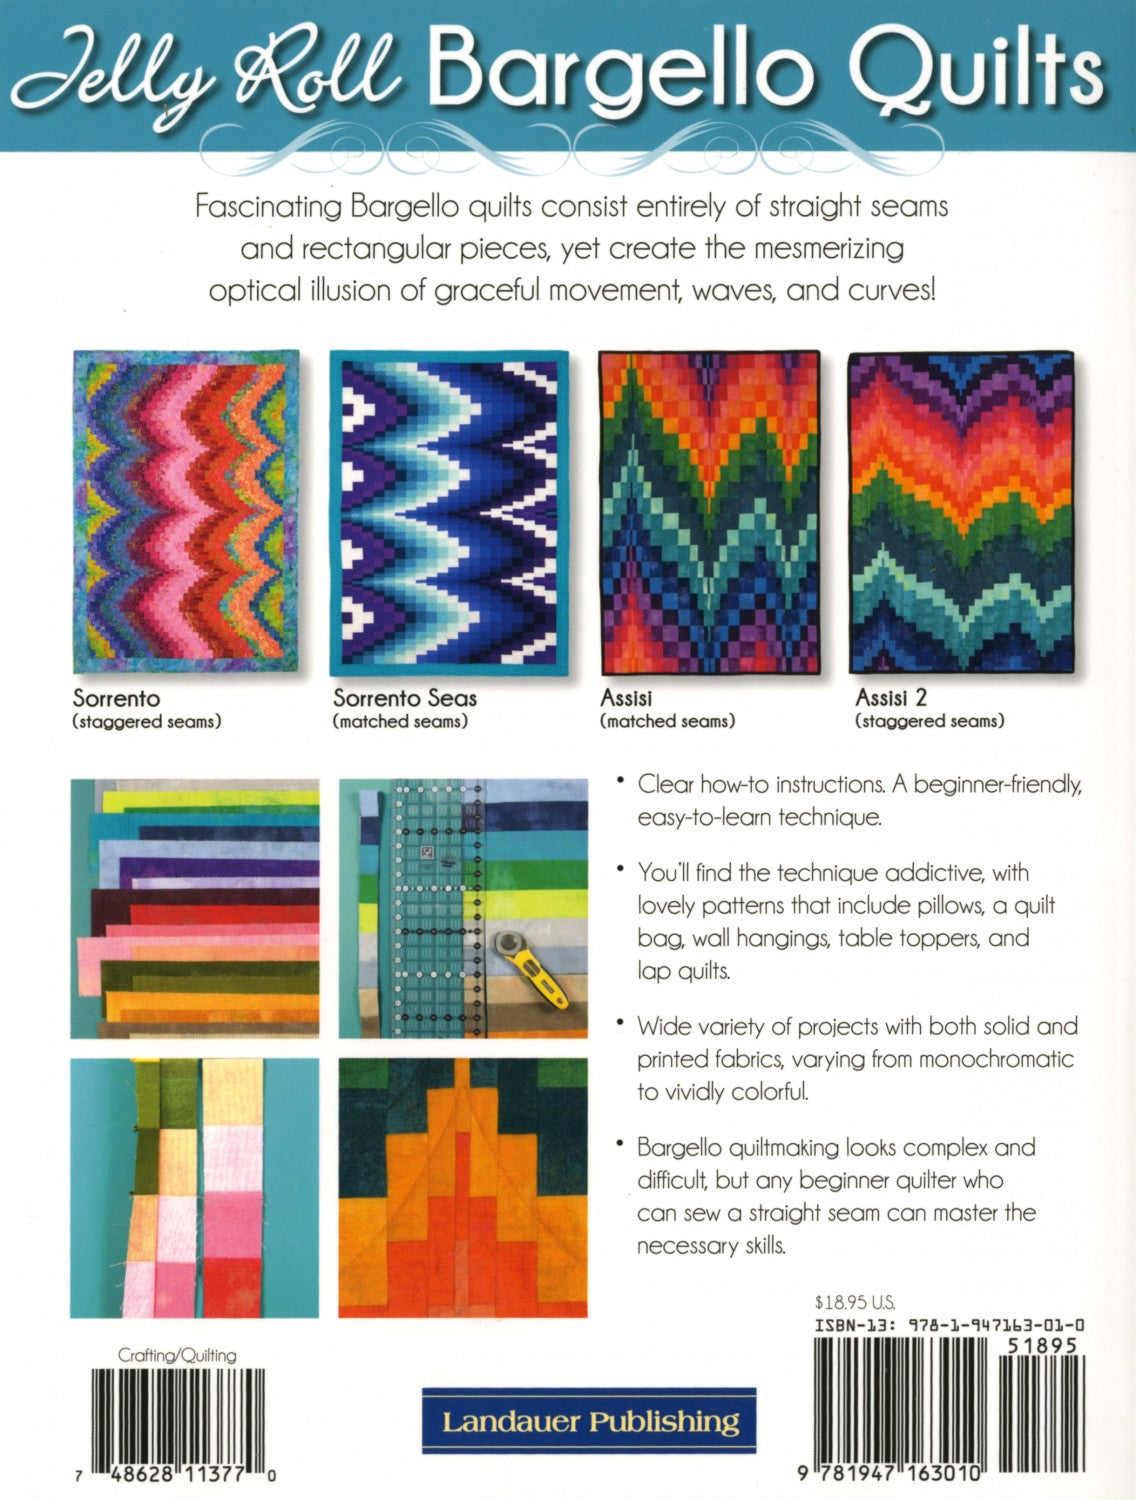 Jelly Roll Bargello Quilts by Karen Hellaby